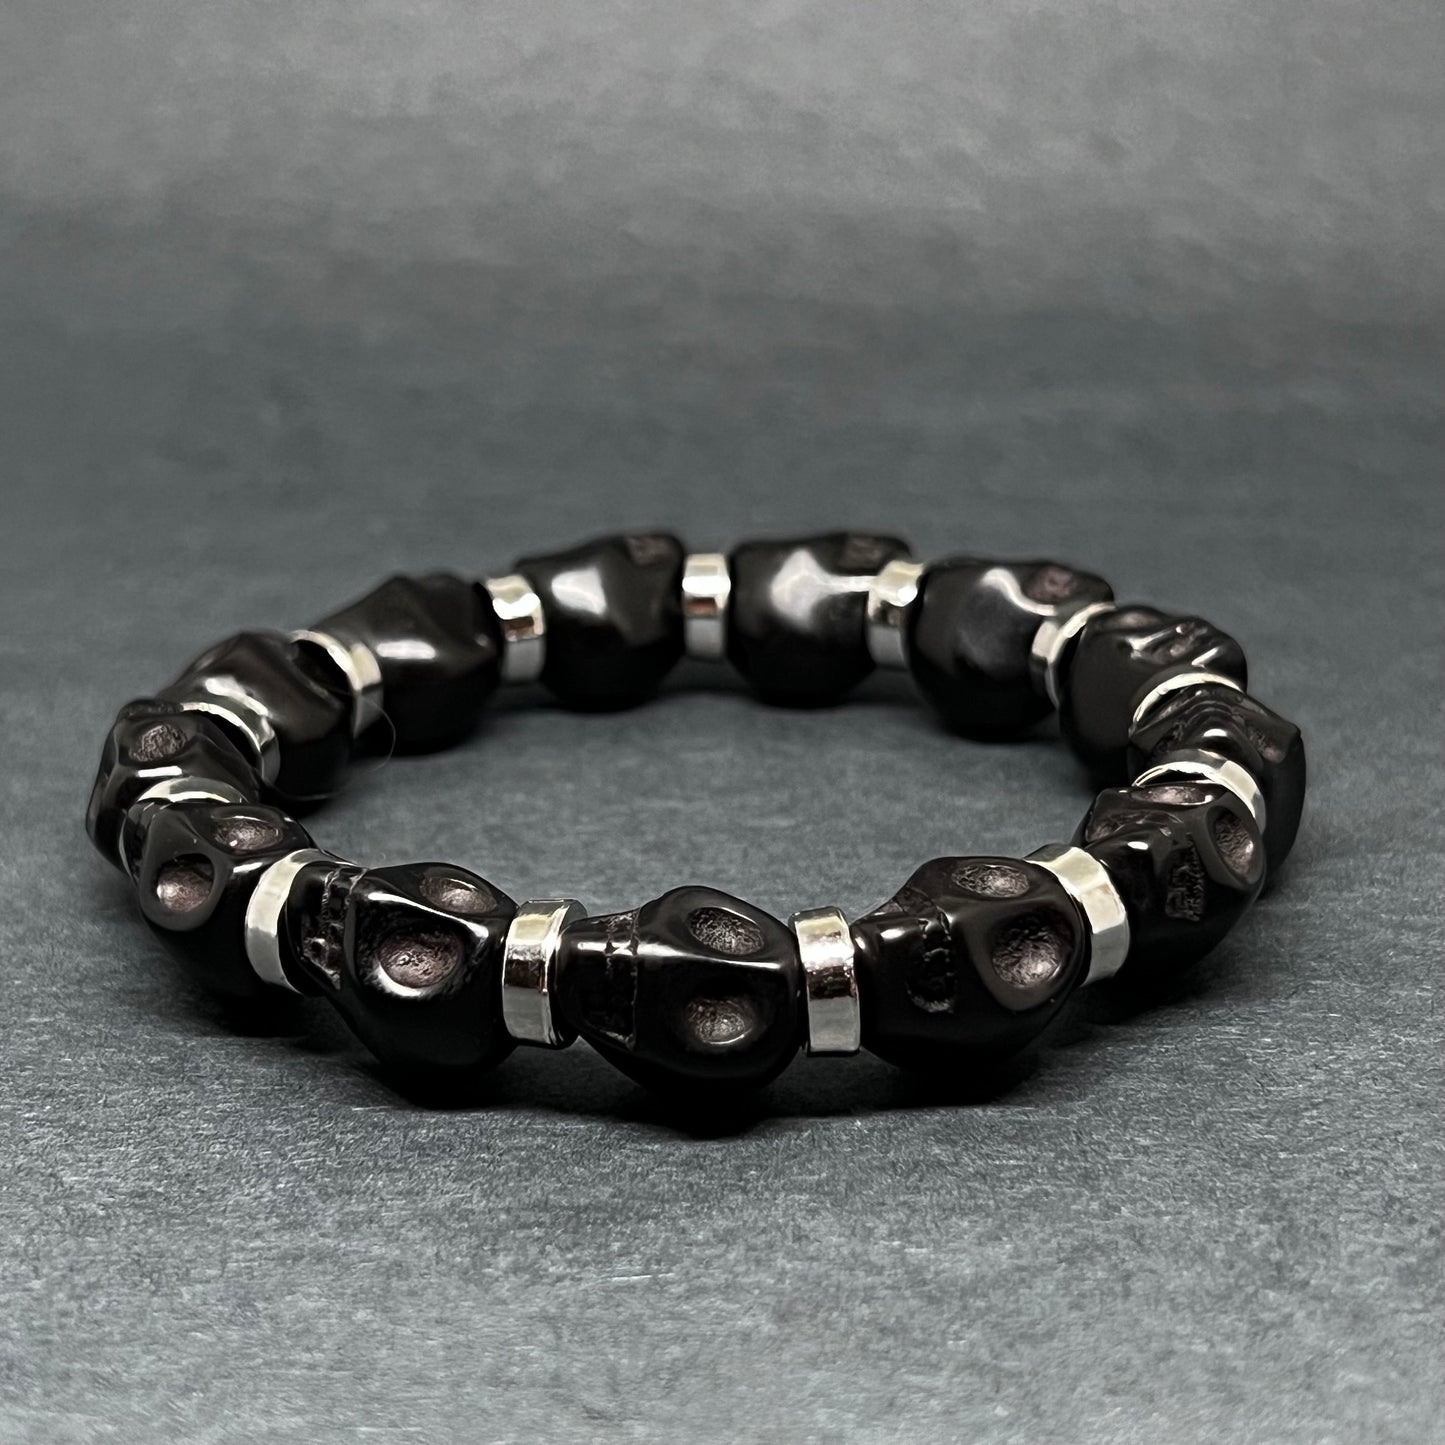 Black Skull Beaded Bracelet with Metallic Silver Steel Tone Beads Wristband Man Jewelry Men's Casual Fashion Day of the Dead Halloween Gift